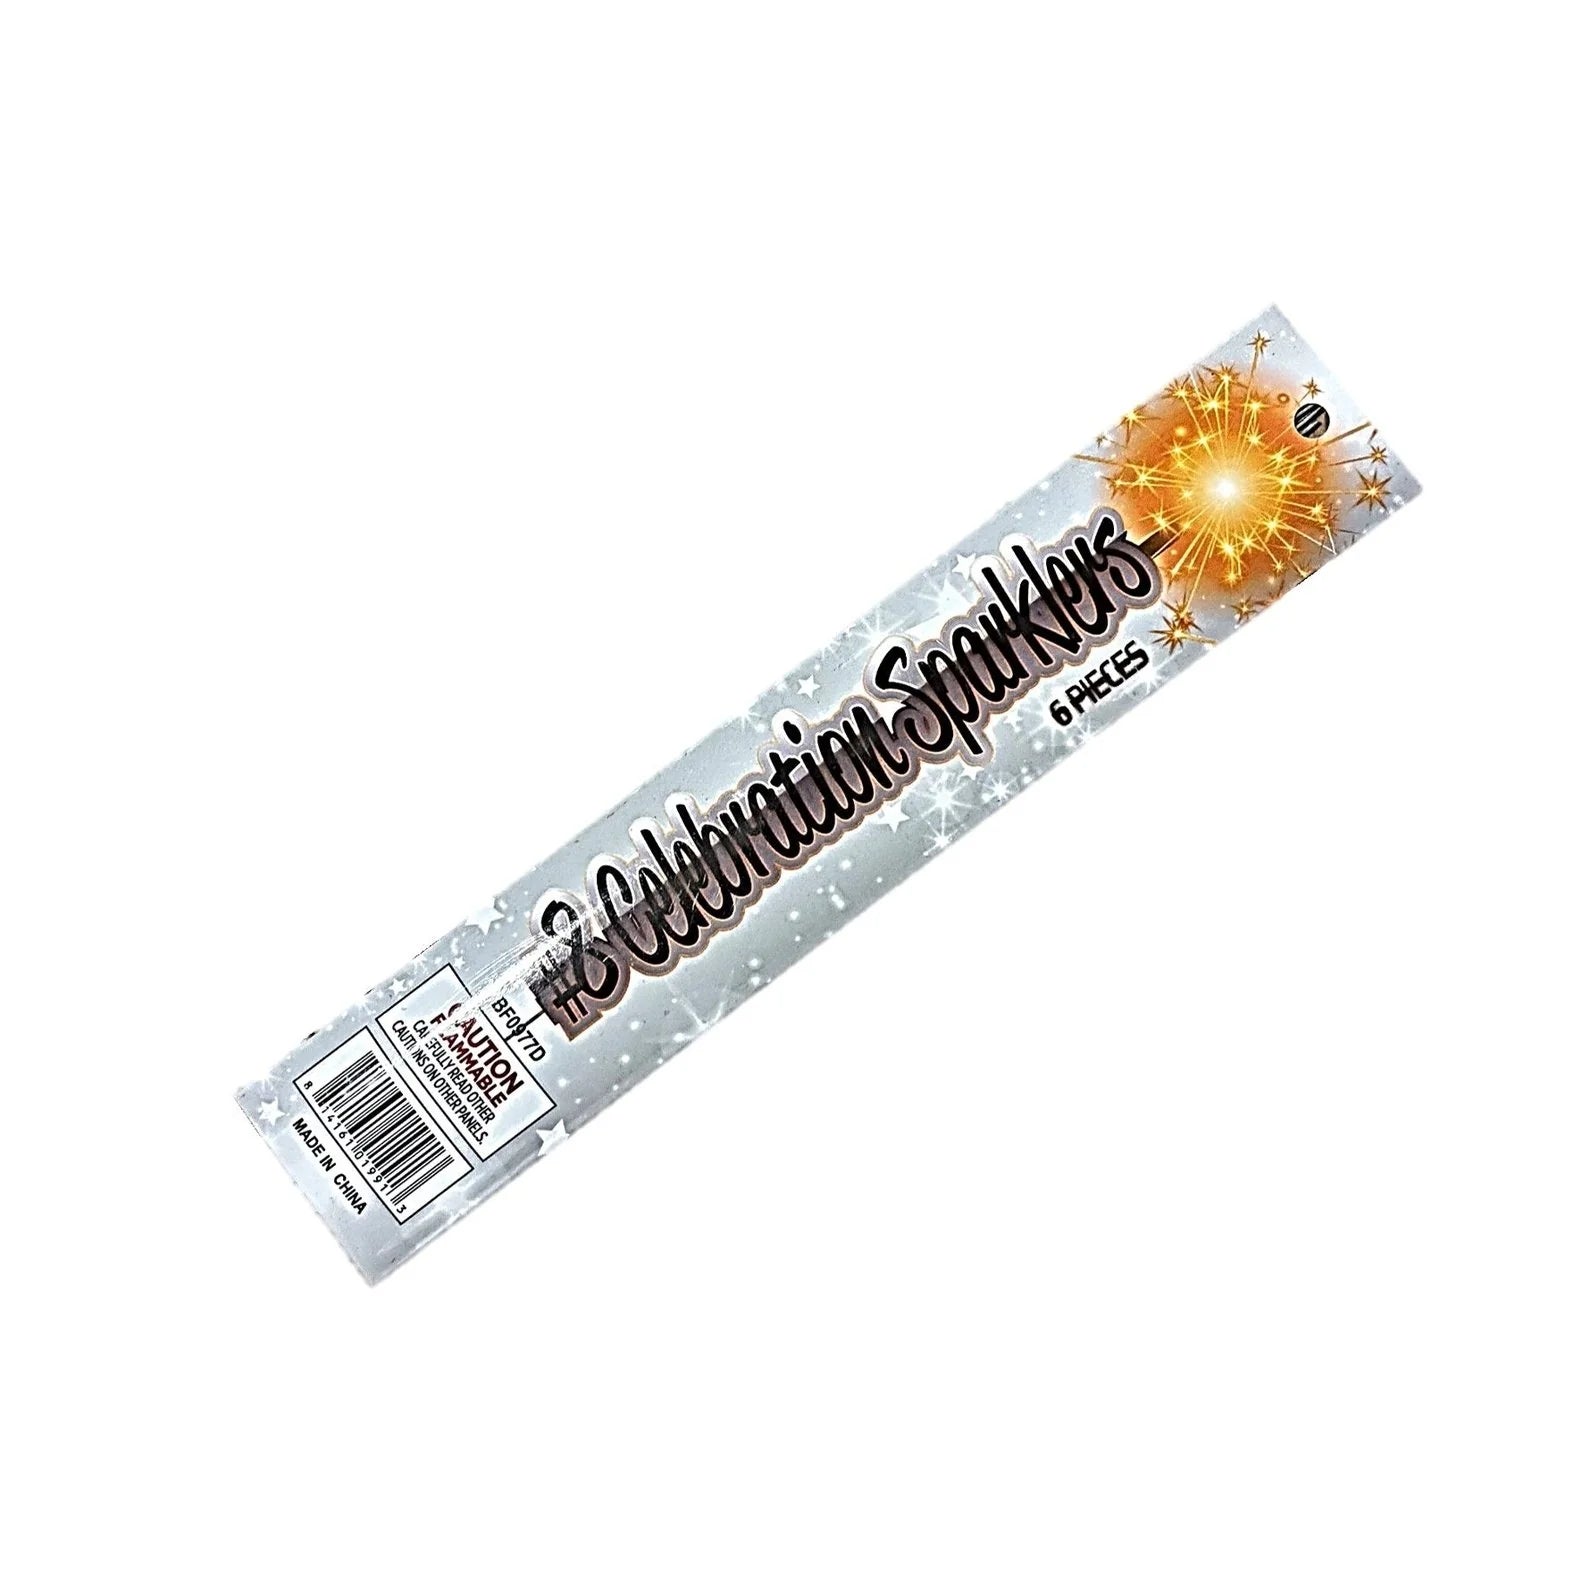 600 Piece 8 Inch Gold Sparklers - 100 Packs of 6 Sparklers